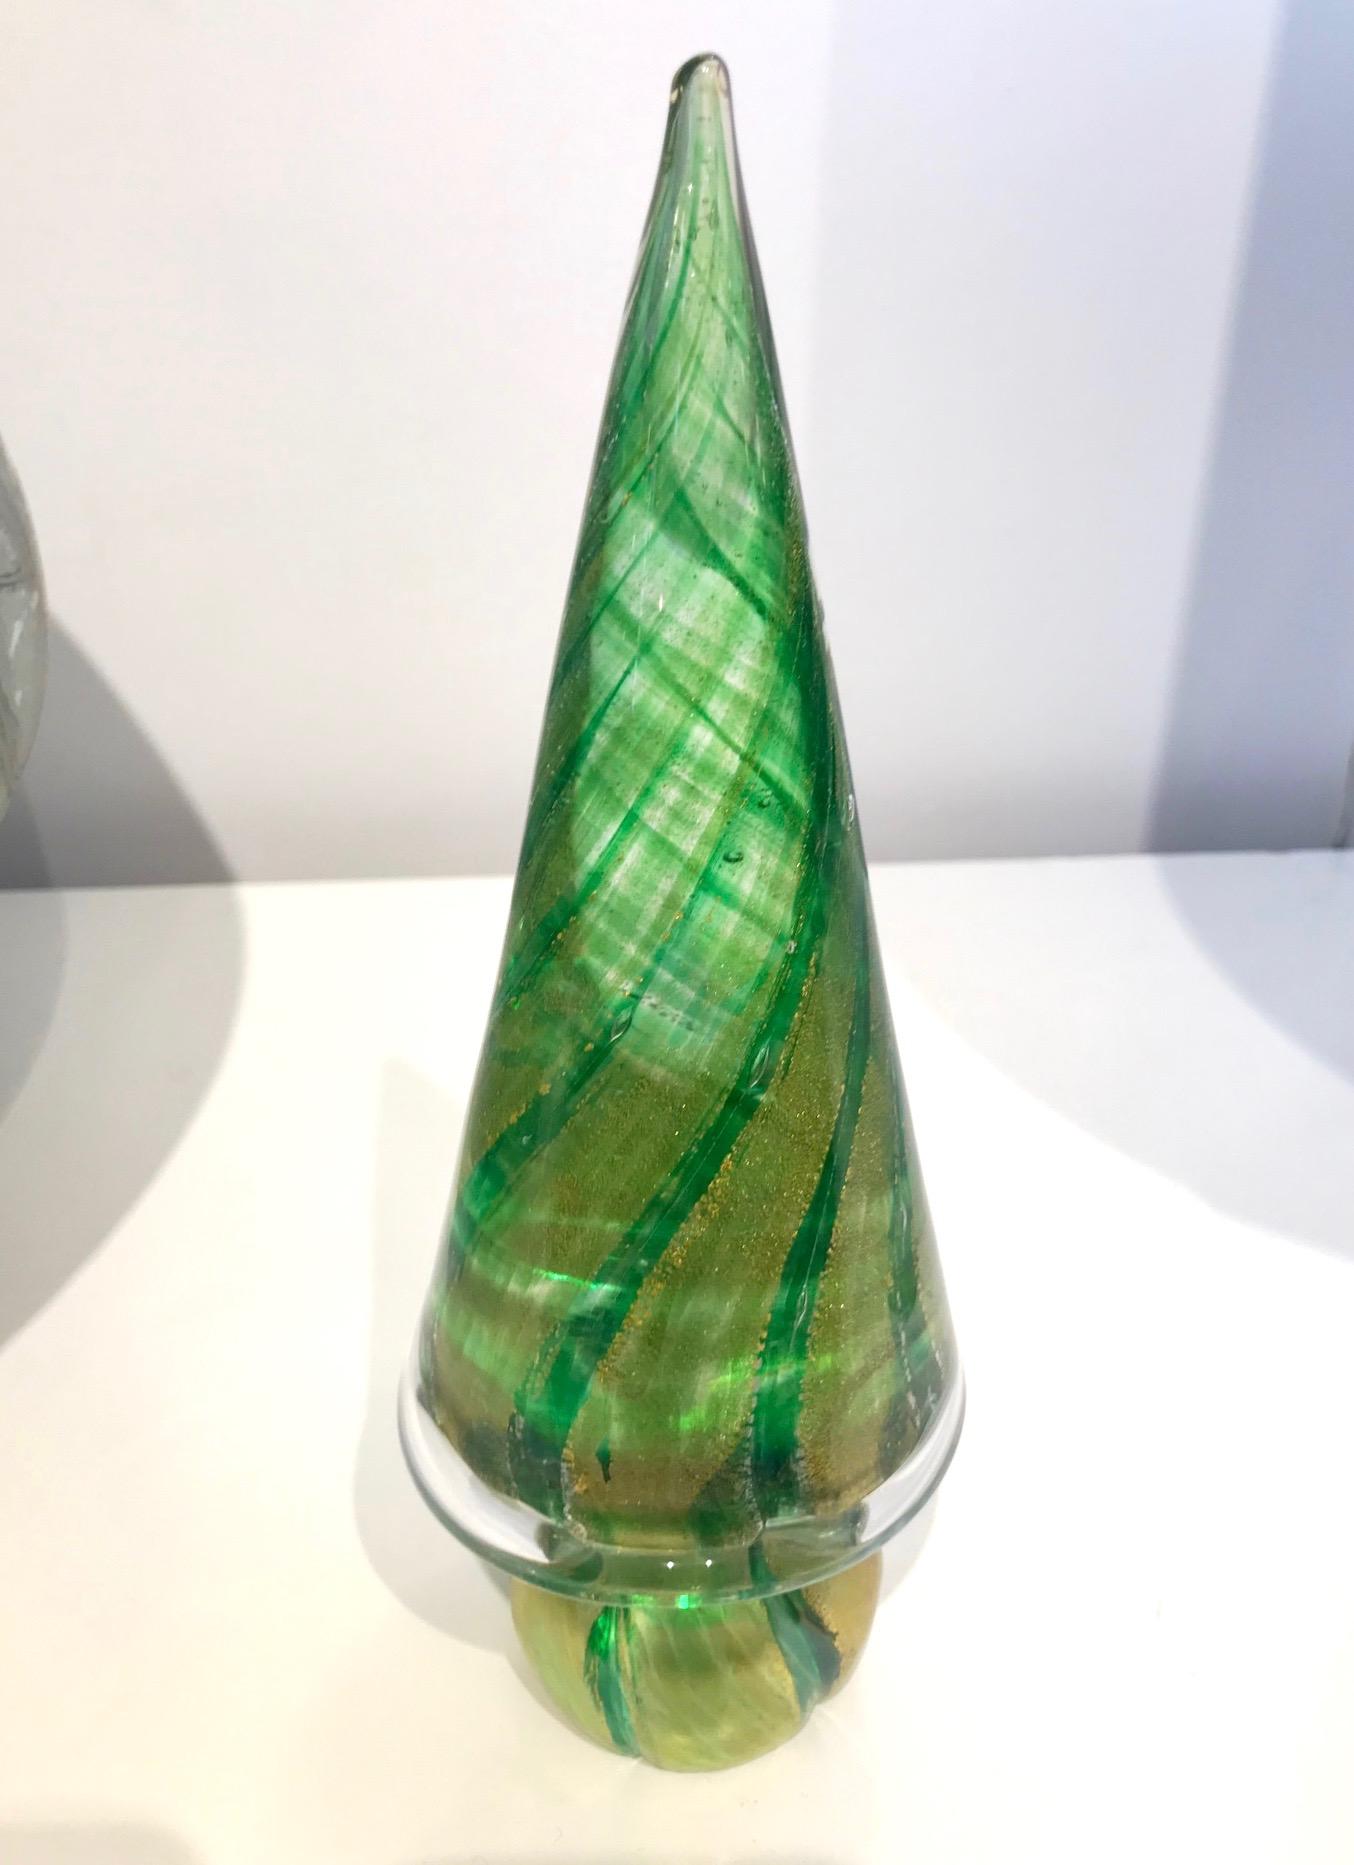 Christmas tree sculpture of organic sleek Minimalist cone design, in mouth blown Murano glass and handcrafted, a vintage creation signed by the Venetian Company Formia. Worked in Sommerso, crystal clear layered glass, it is realized in an attractive